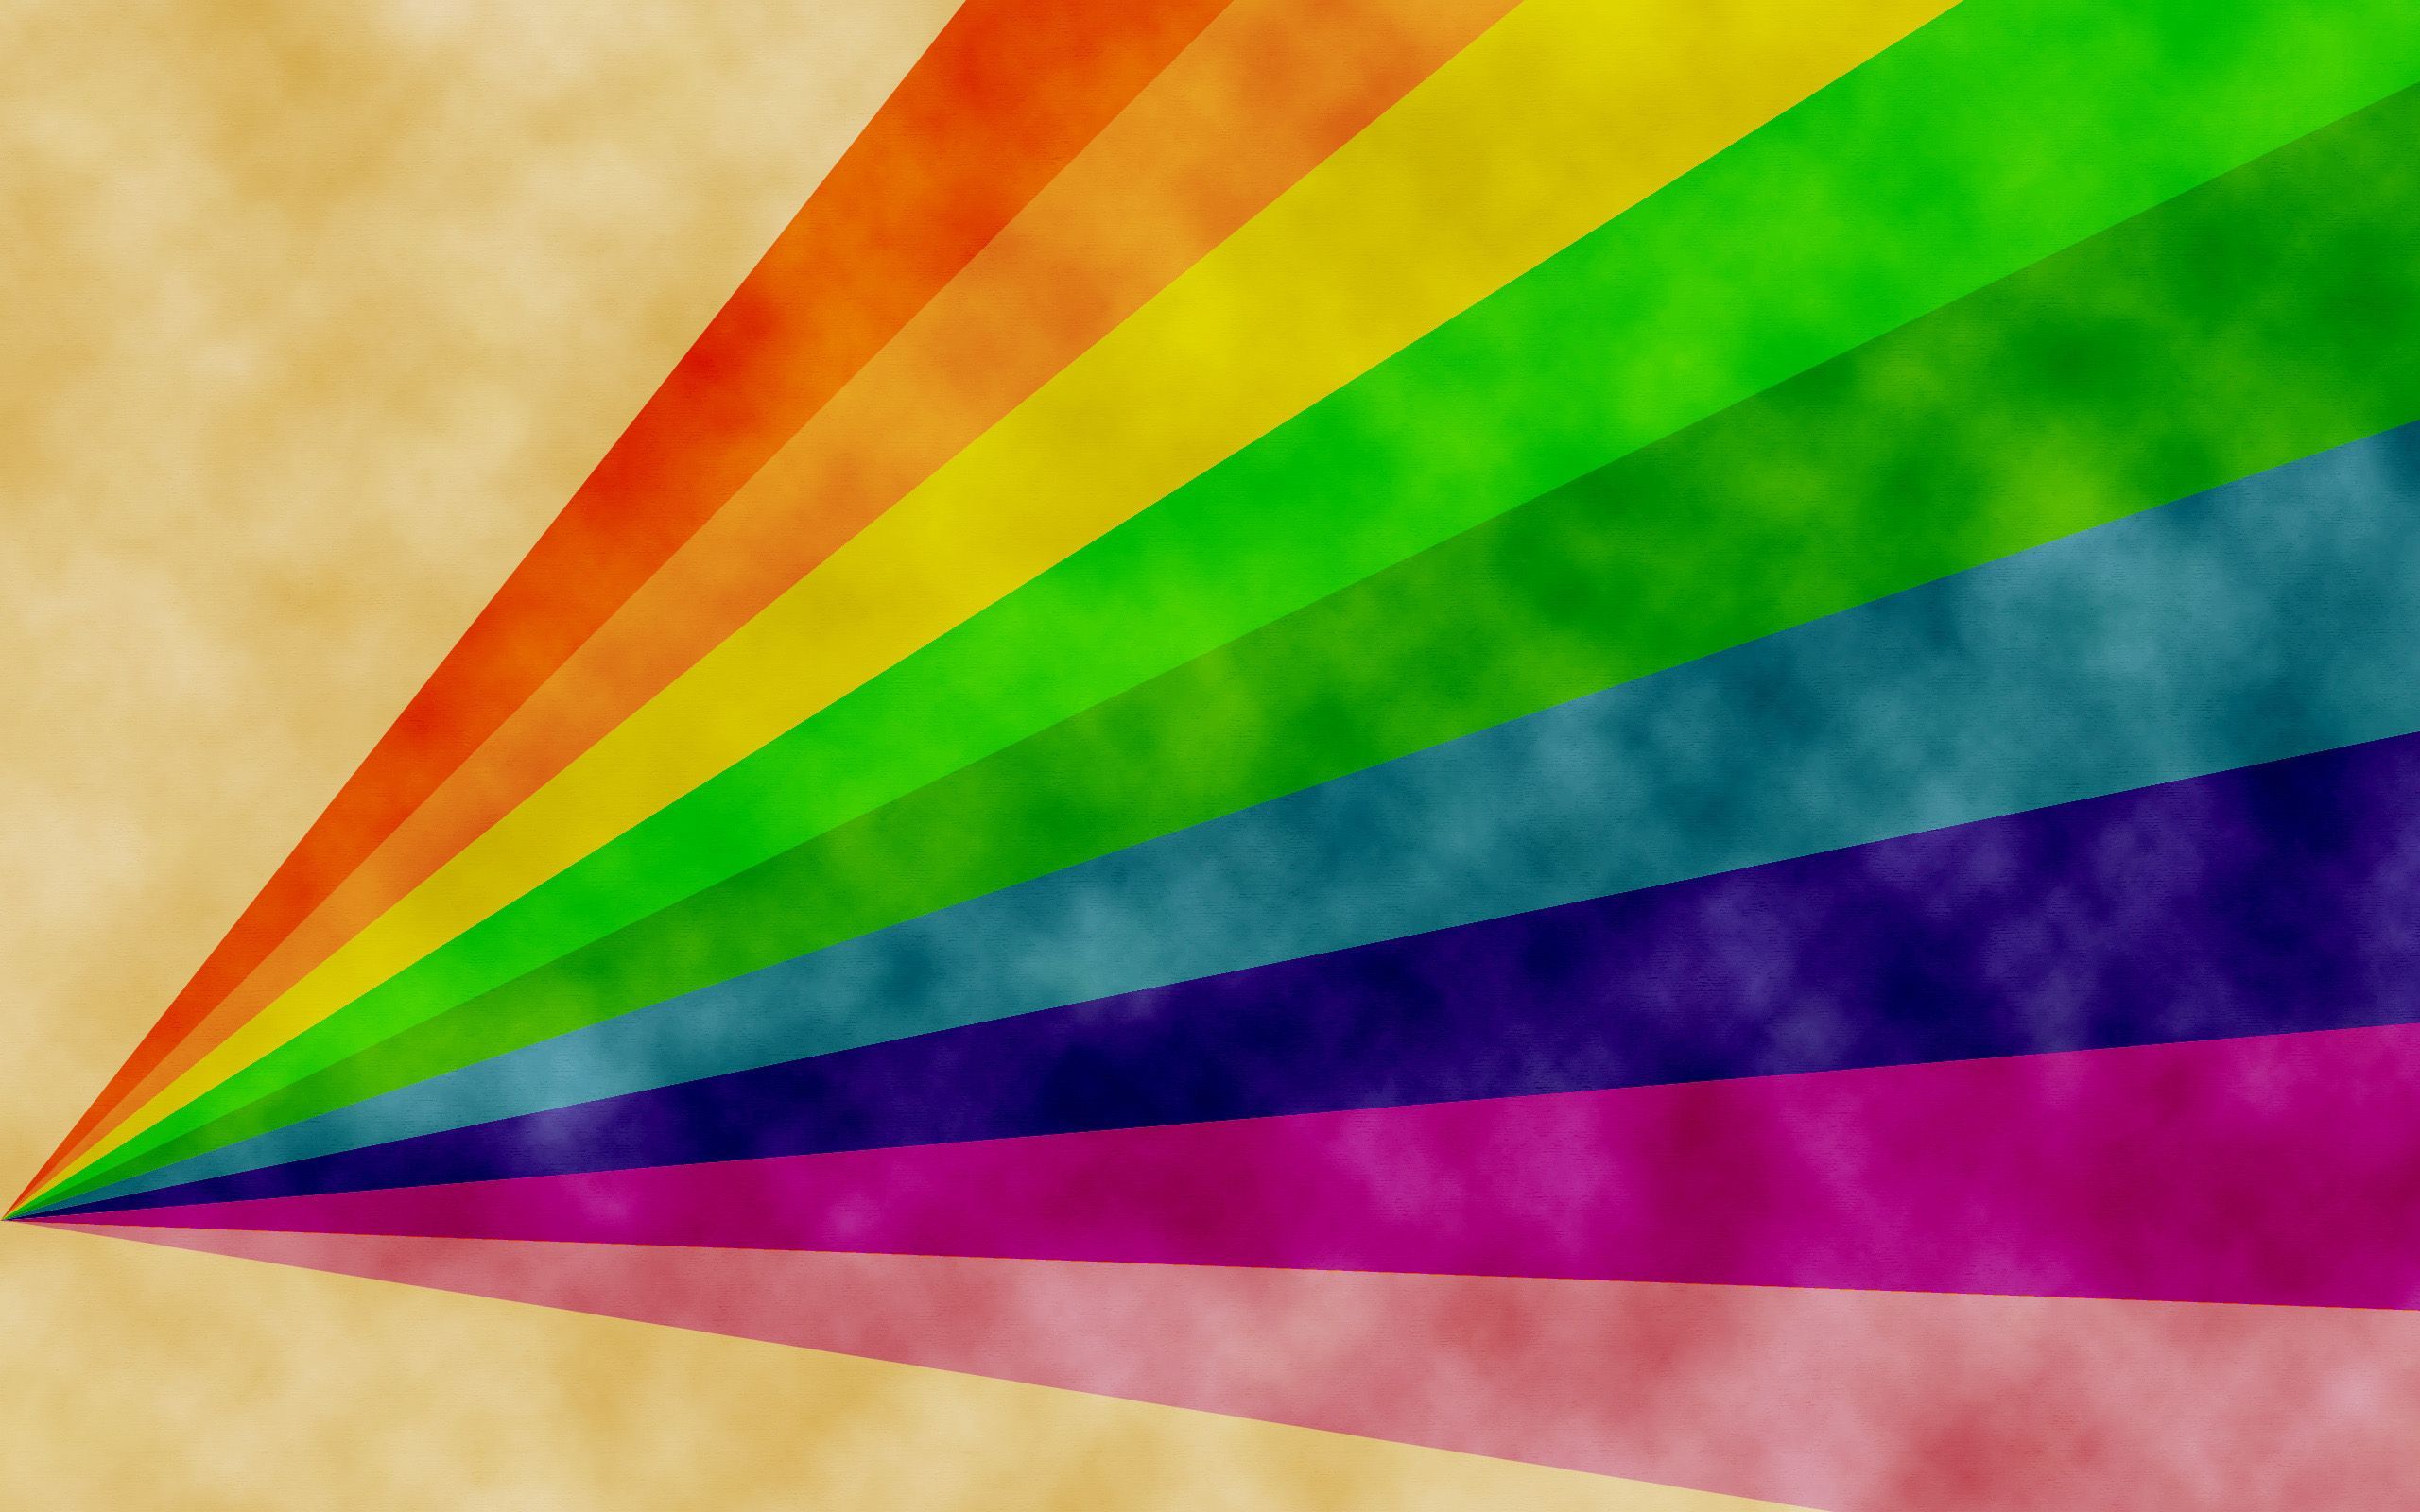 A wallpaper with a rainbow colored rays on a brown background - Gay, LGBT, pride